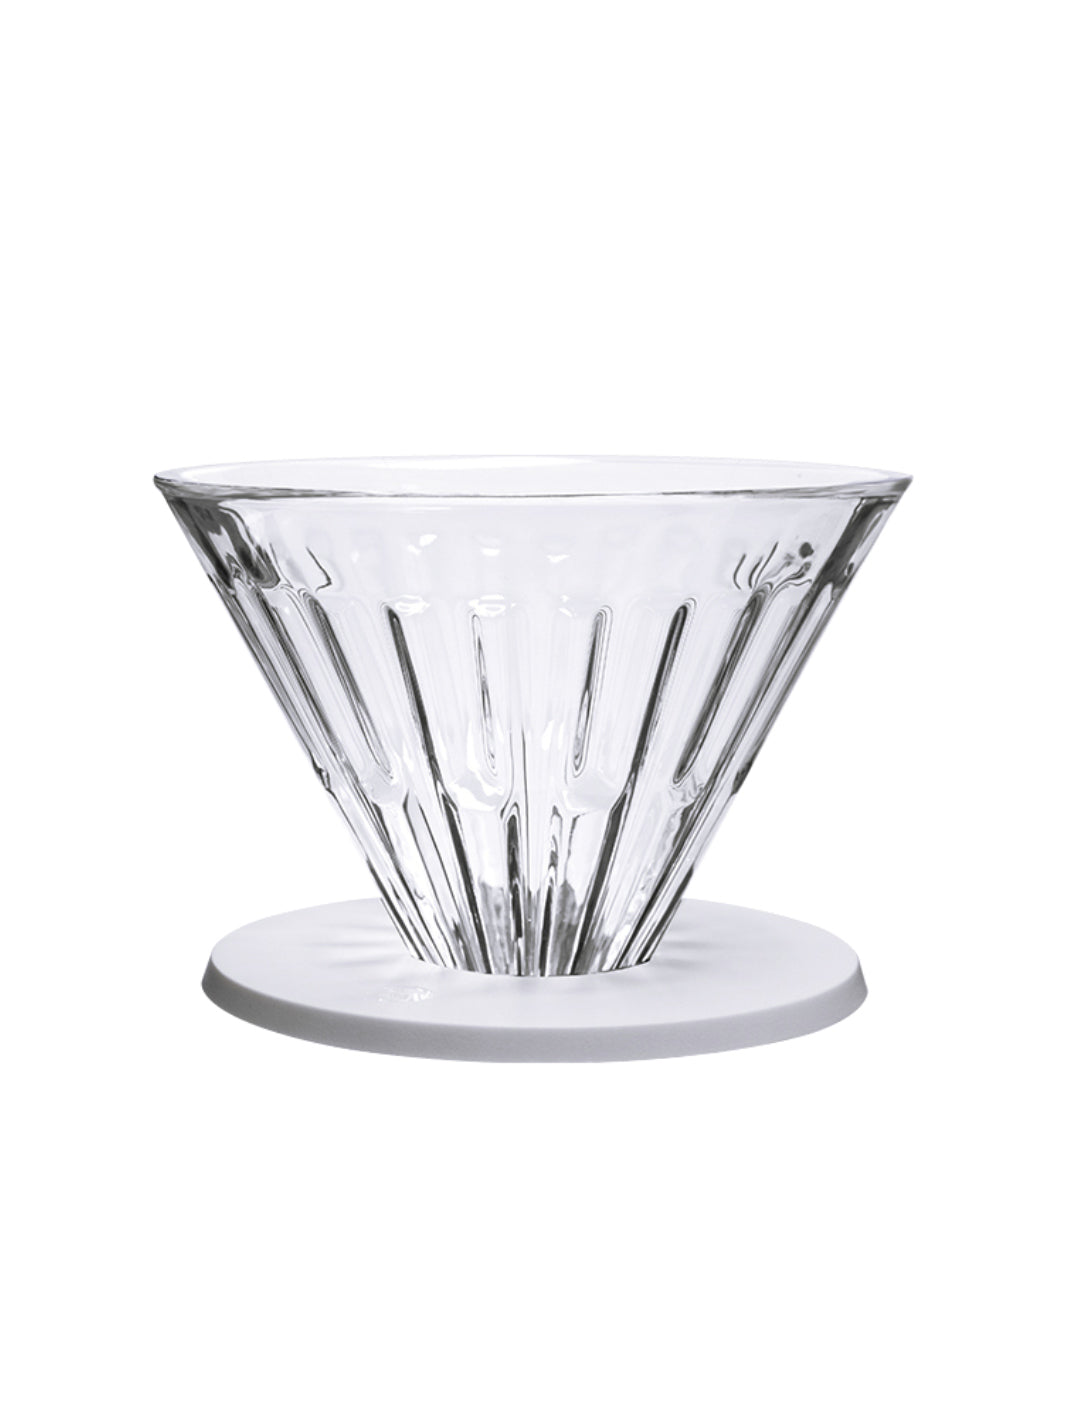 TIMEMORE Crystal Eye Glass Dripper with Holder